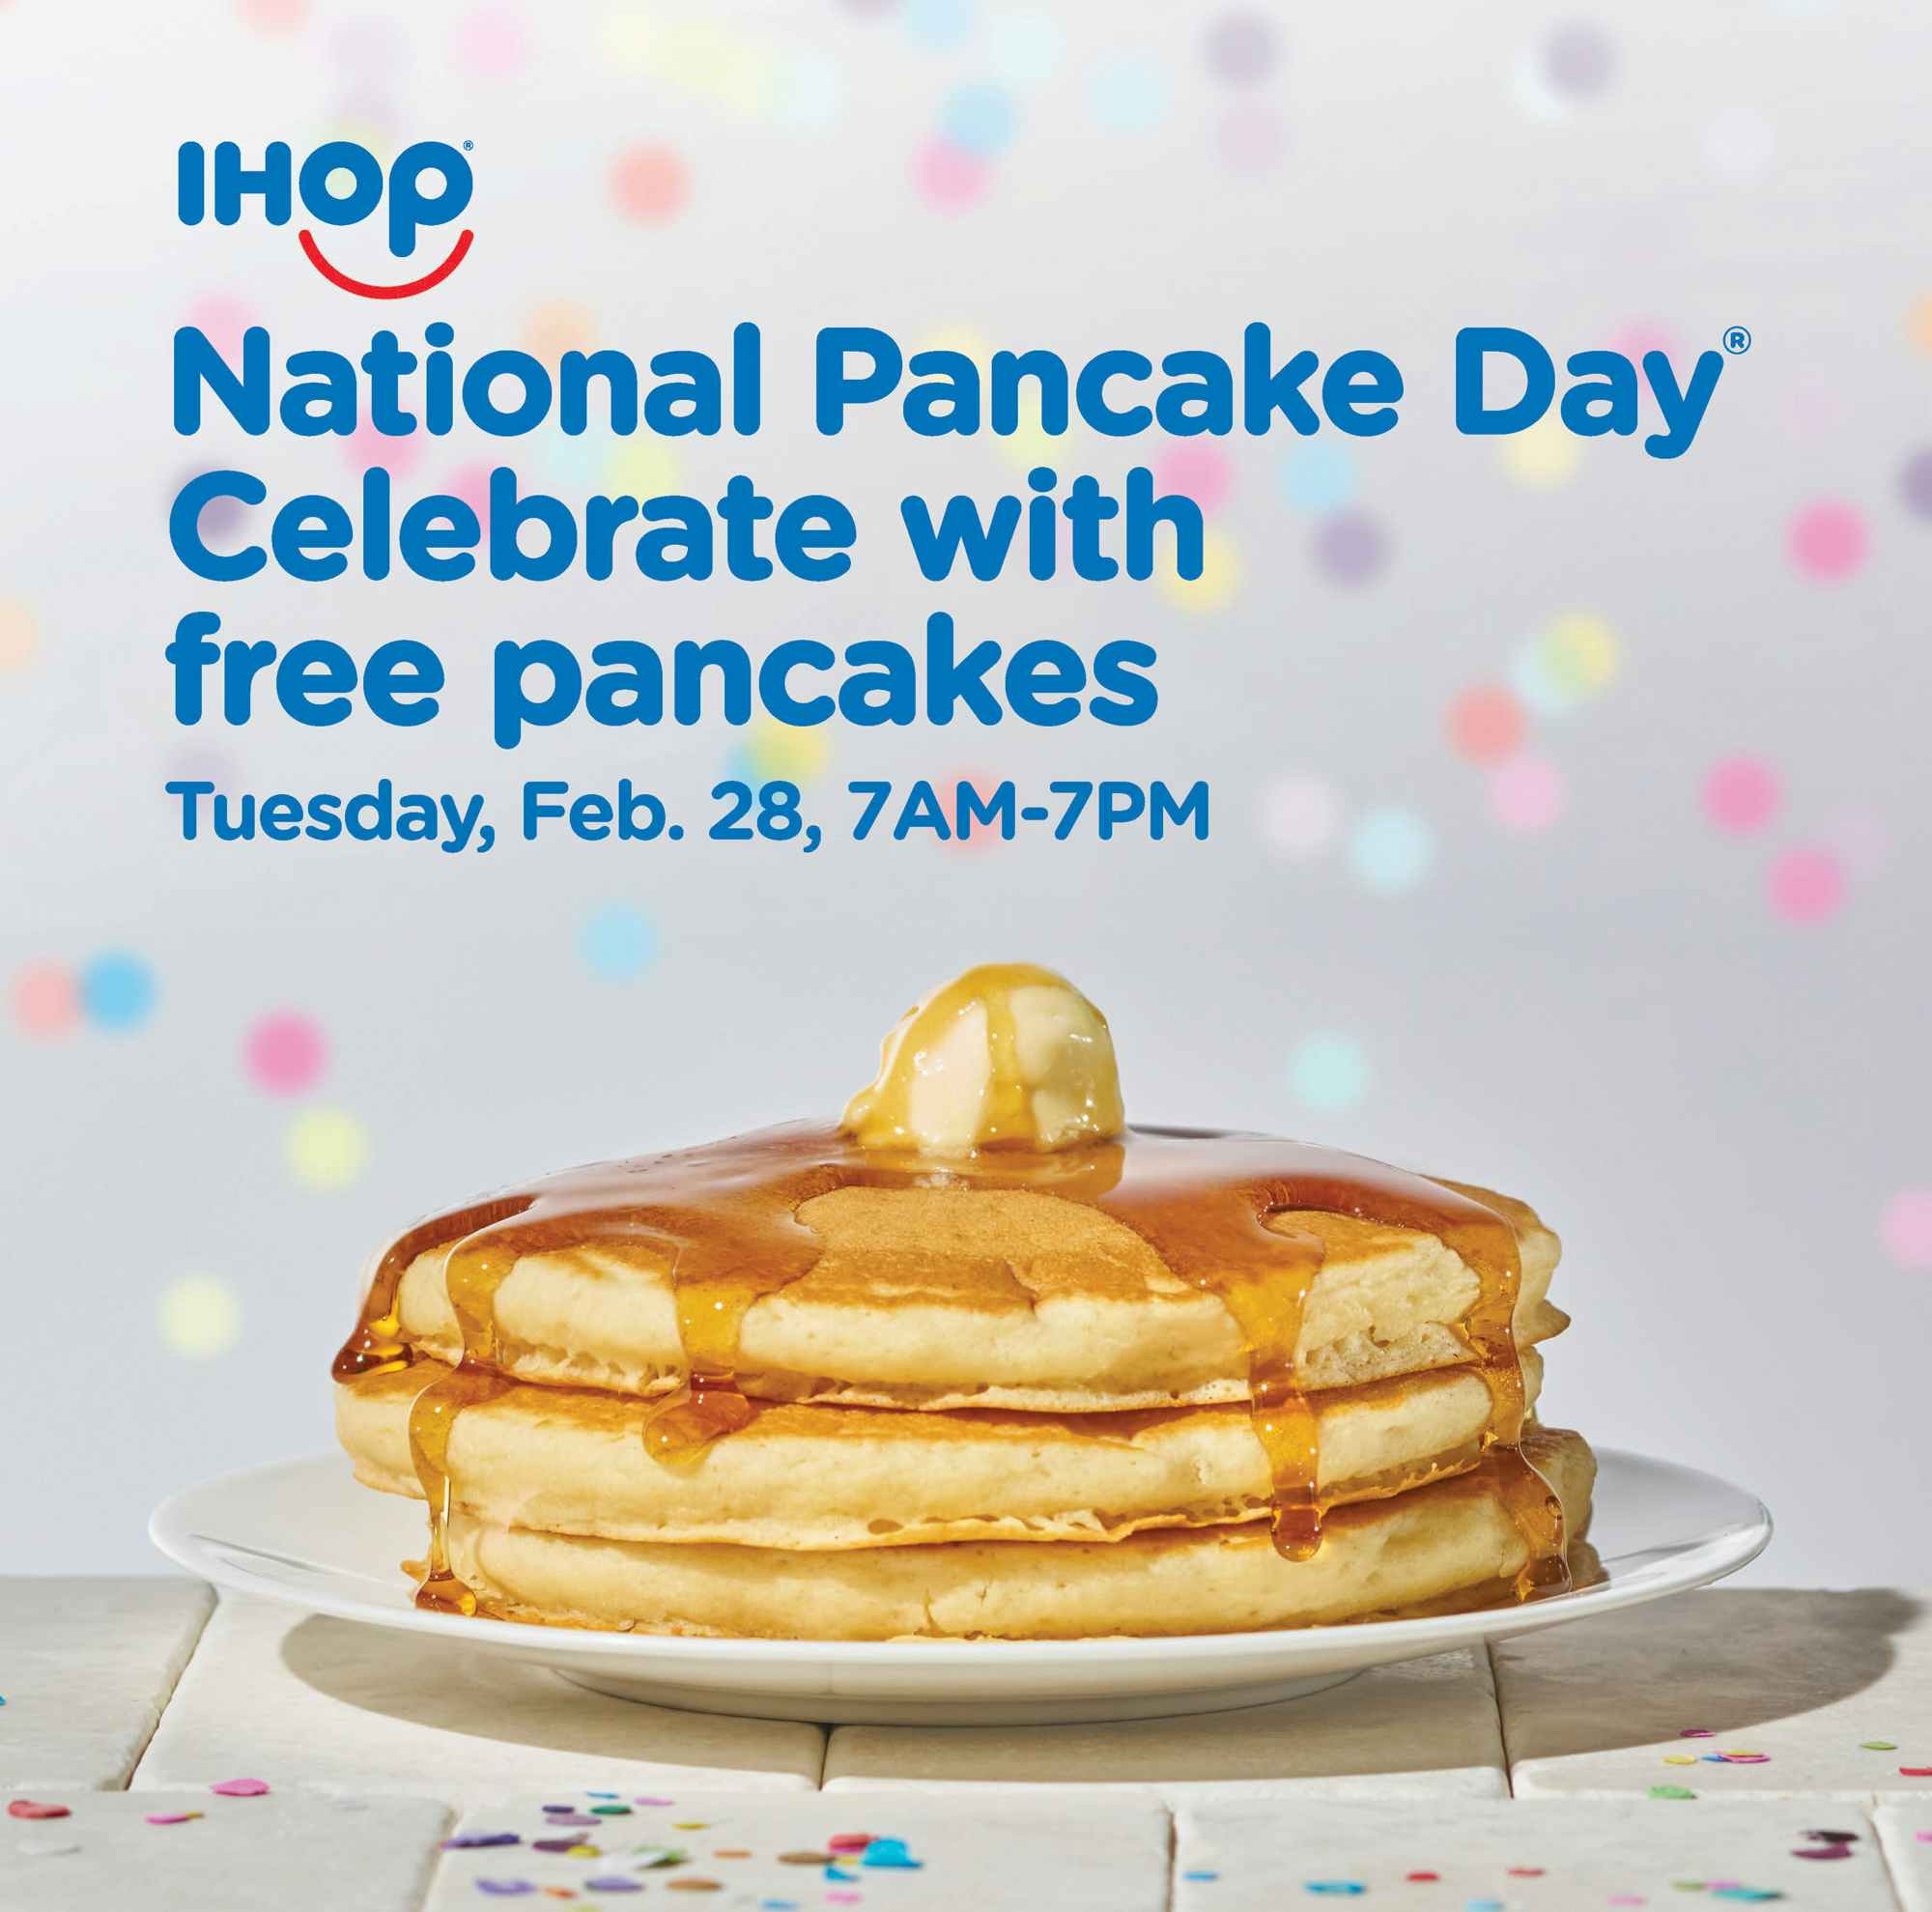 official promo for ihop national pancake day free pancakes